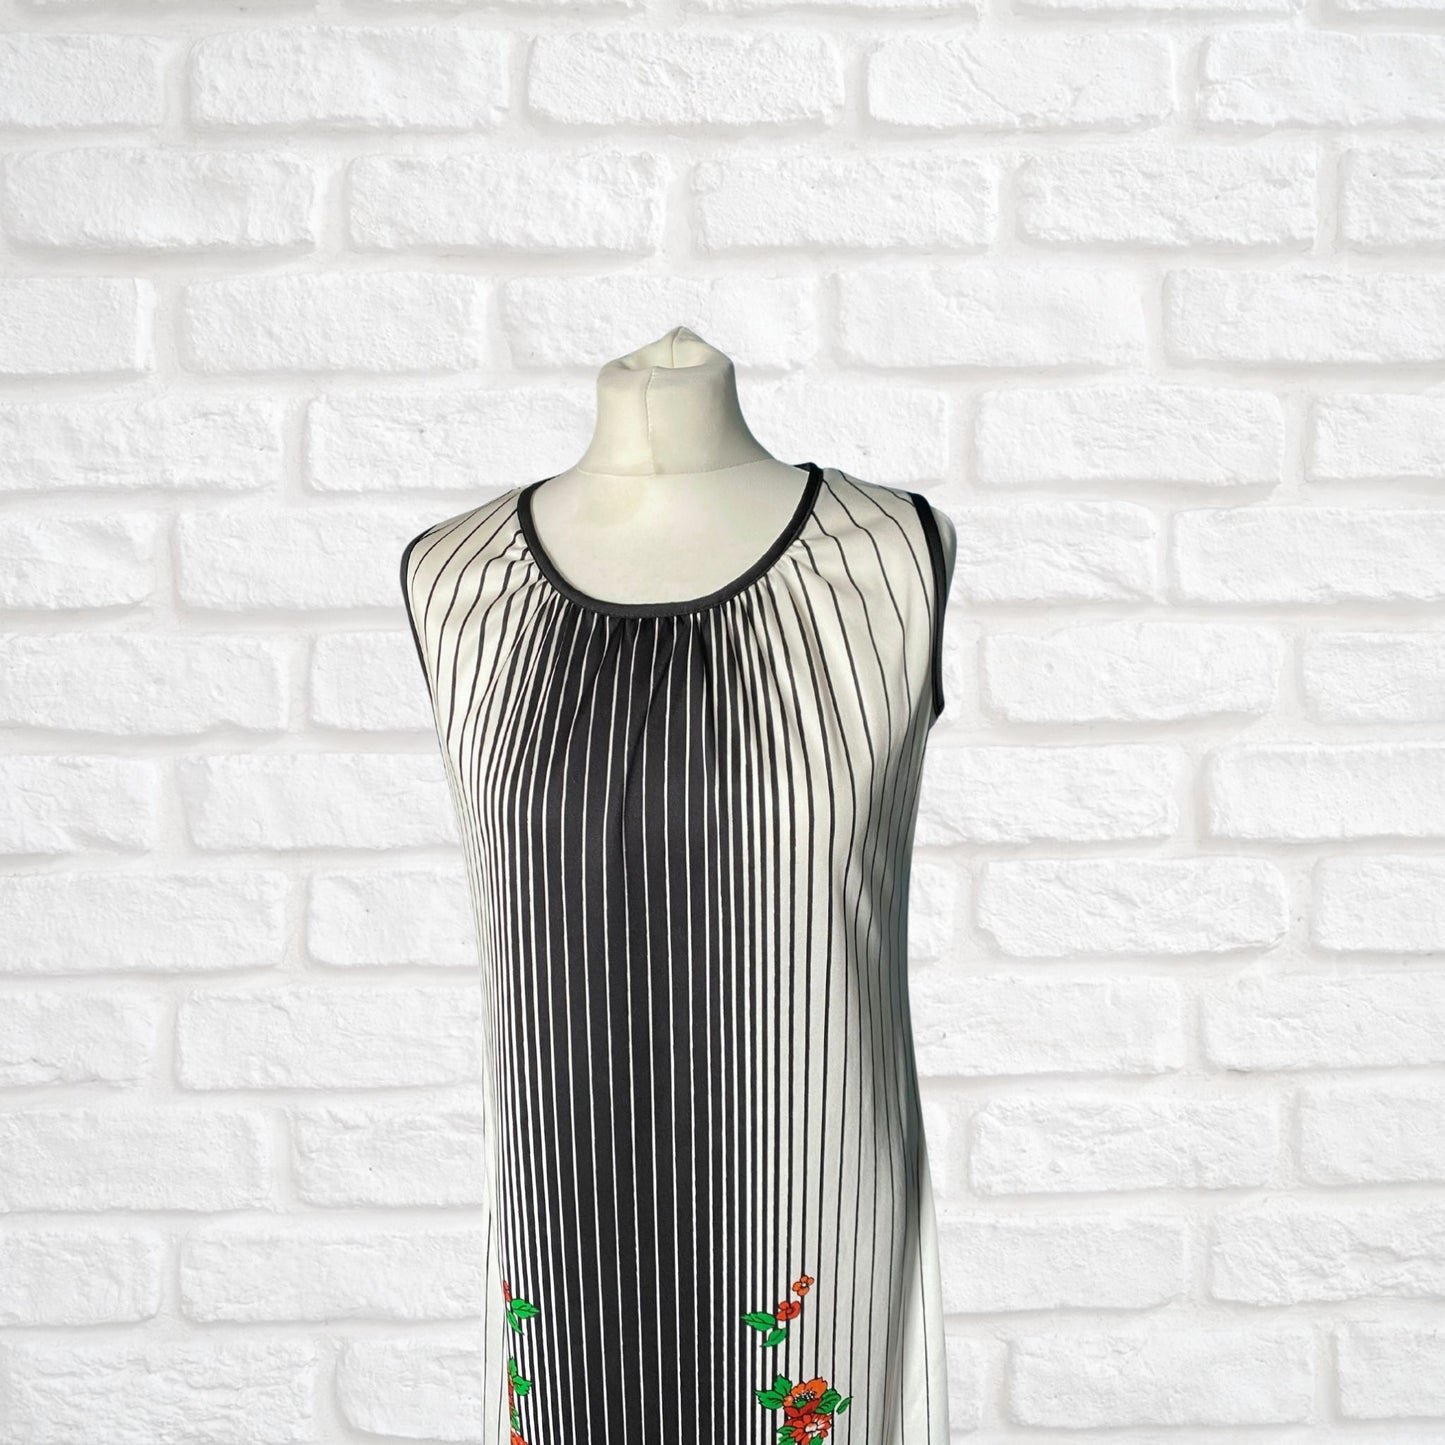 70s Monochrome Striped Vintage Maxi Dress with Vibrant Floral Detail. Approx UK size 10-12